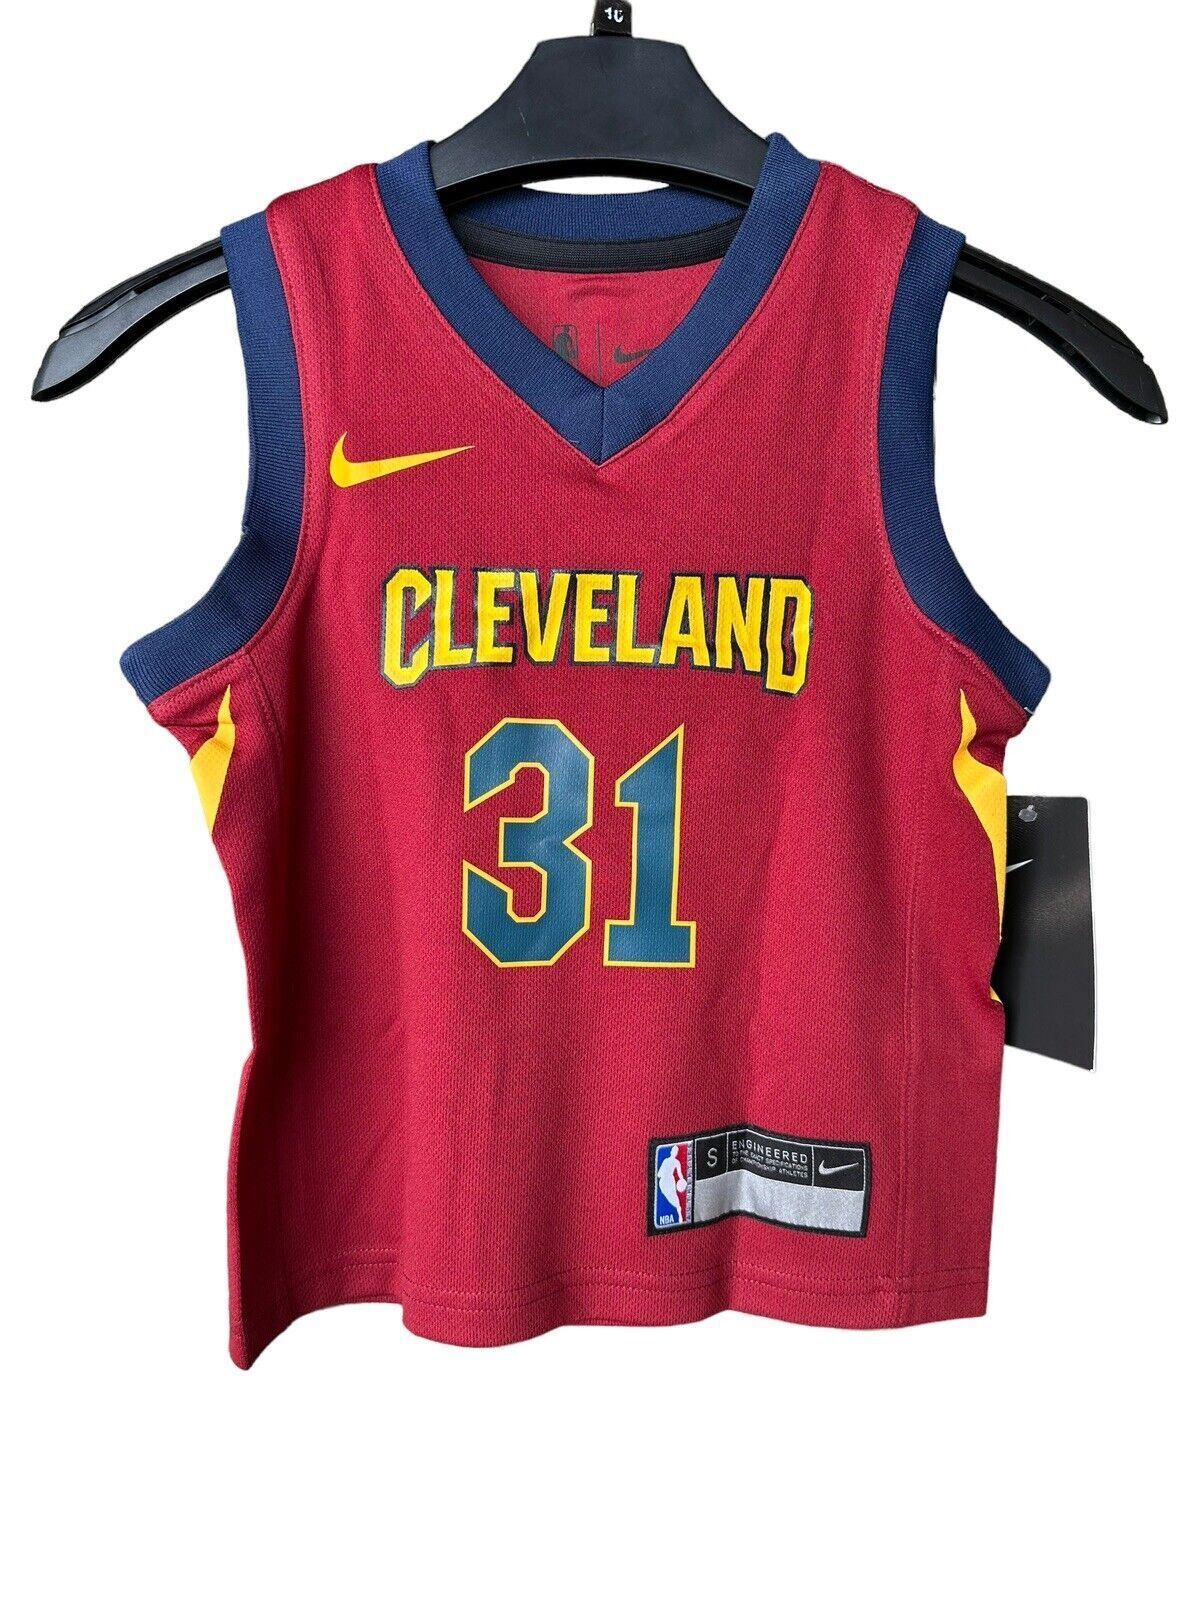 Nike NBA Cleveland Cavaliers Icon Edition Jersey Basketball Children’s Age 3-4Y